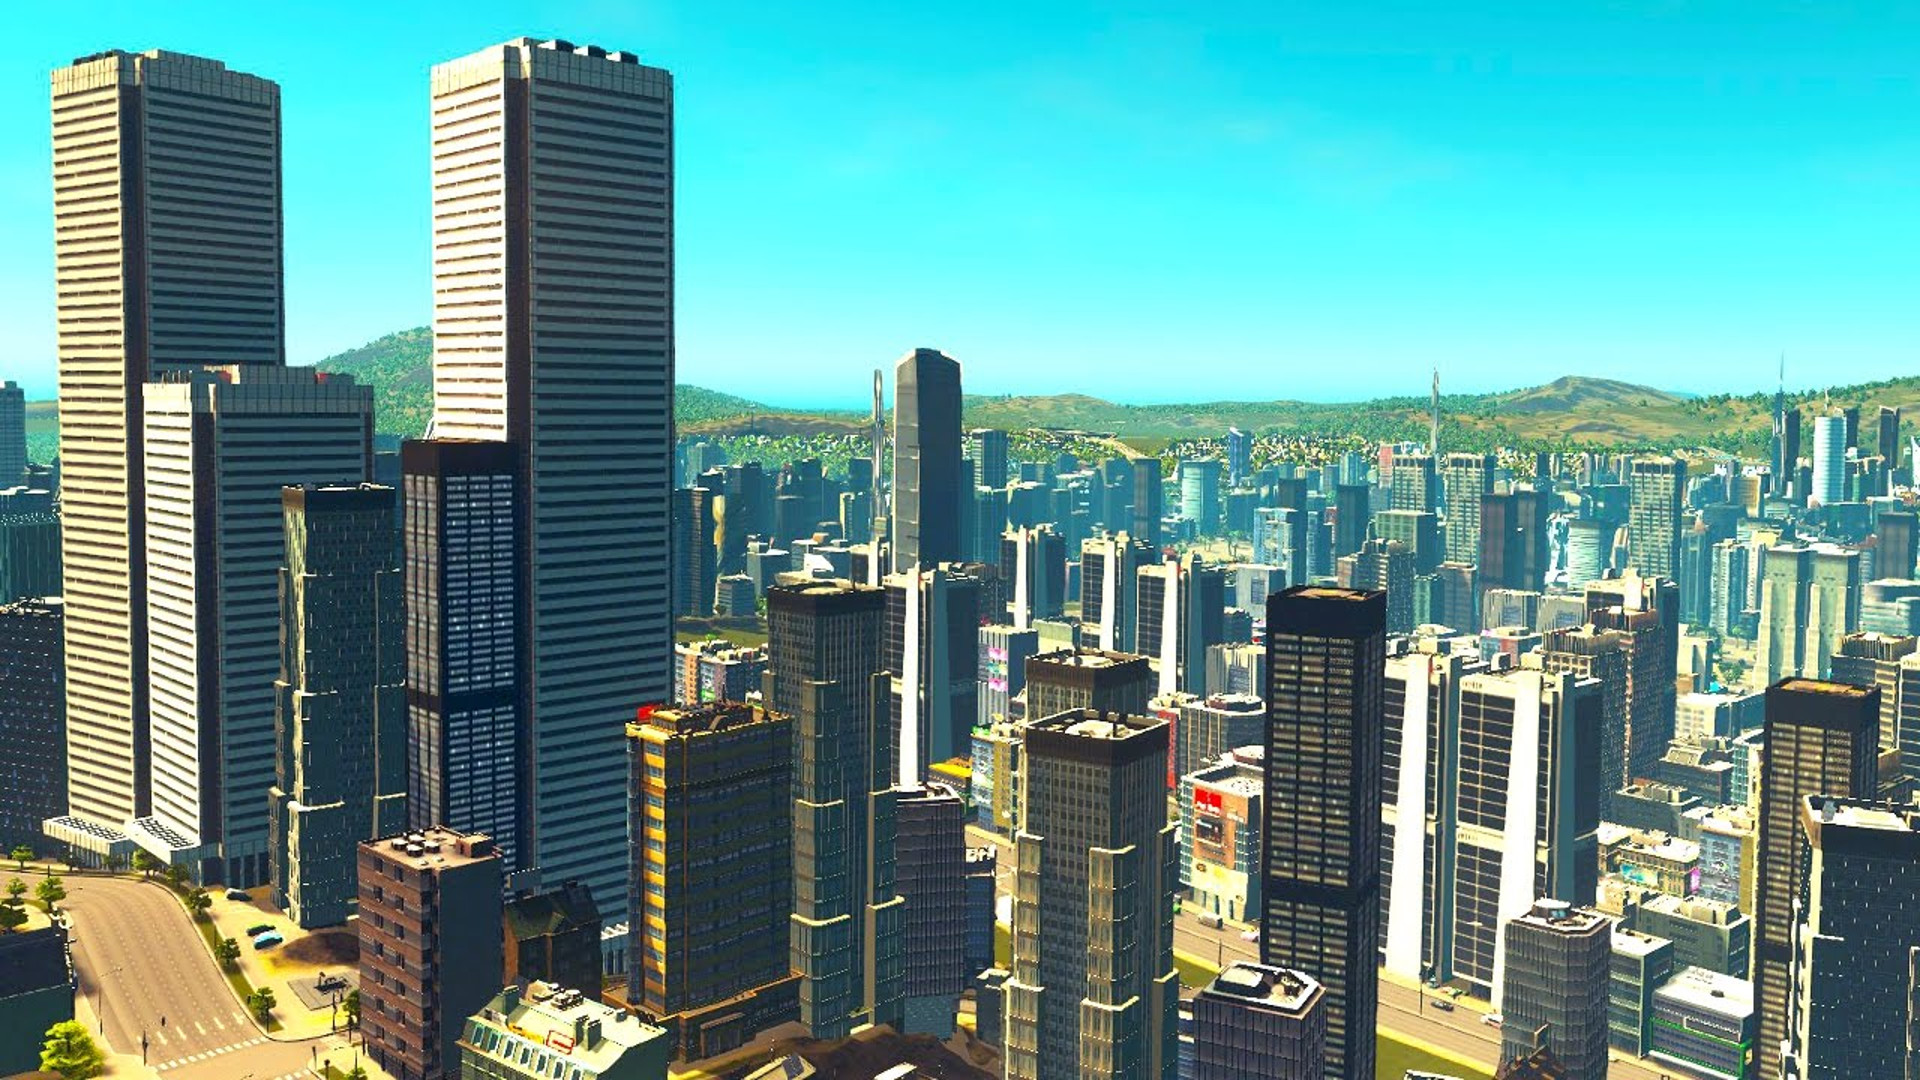 The next Epic free game is the modern king of city builders